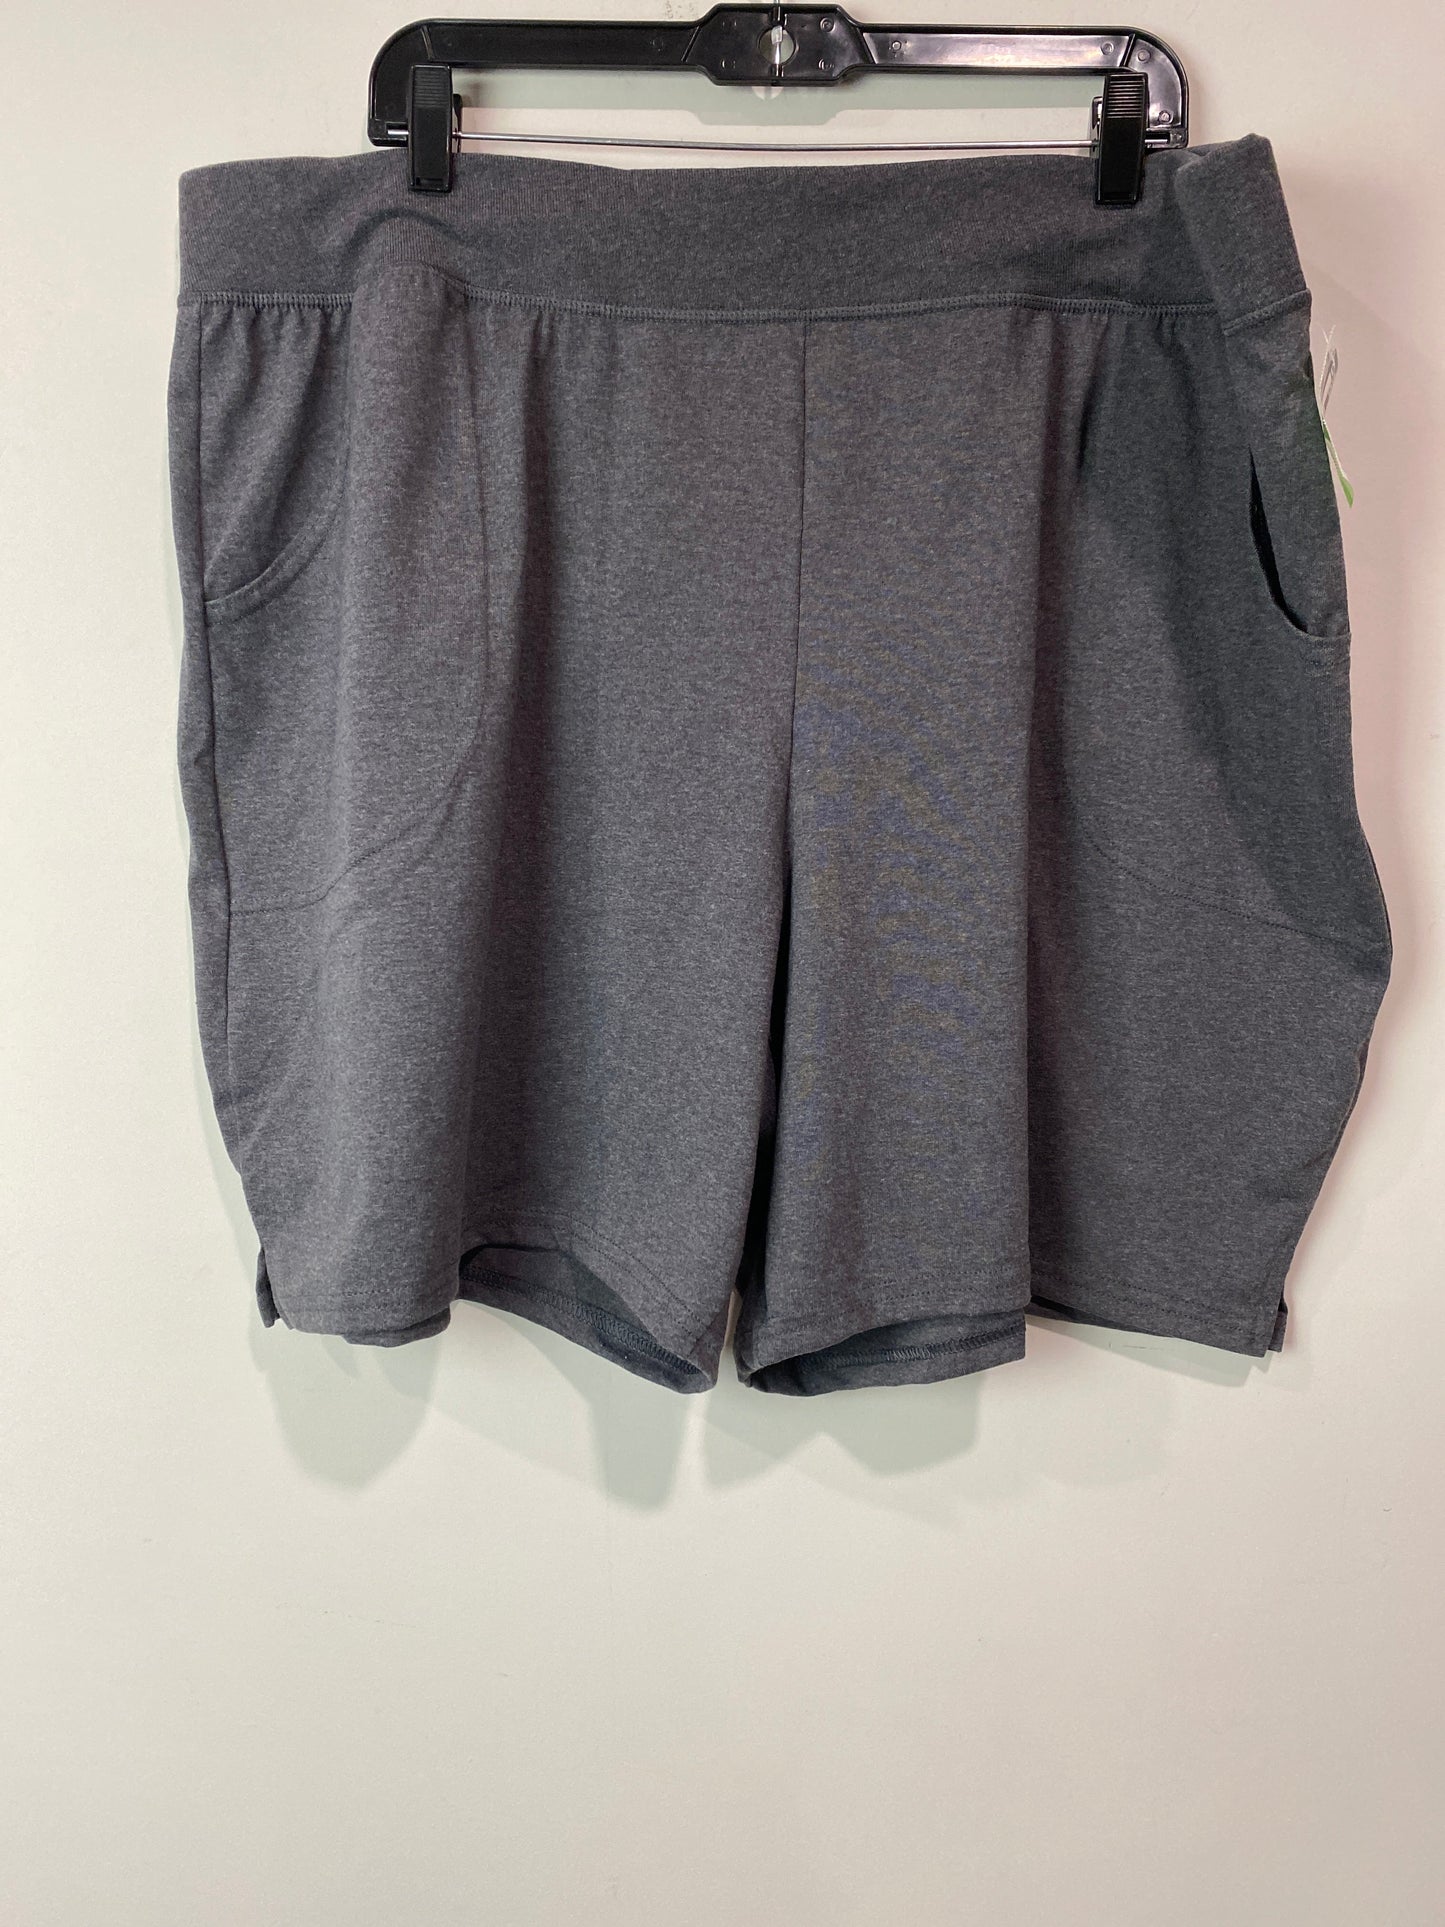 Shorts By Just My Size  Size: 2x